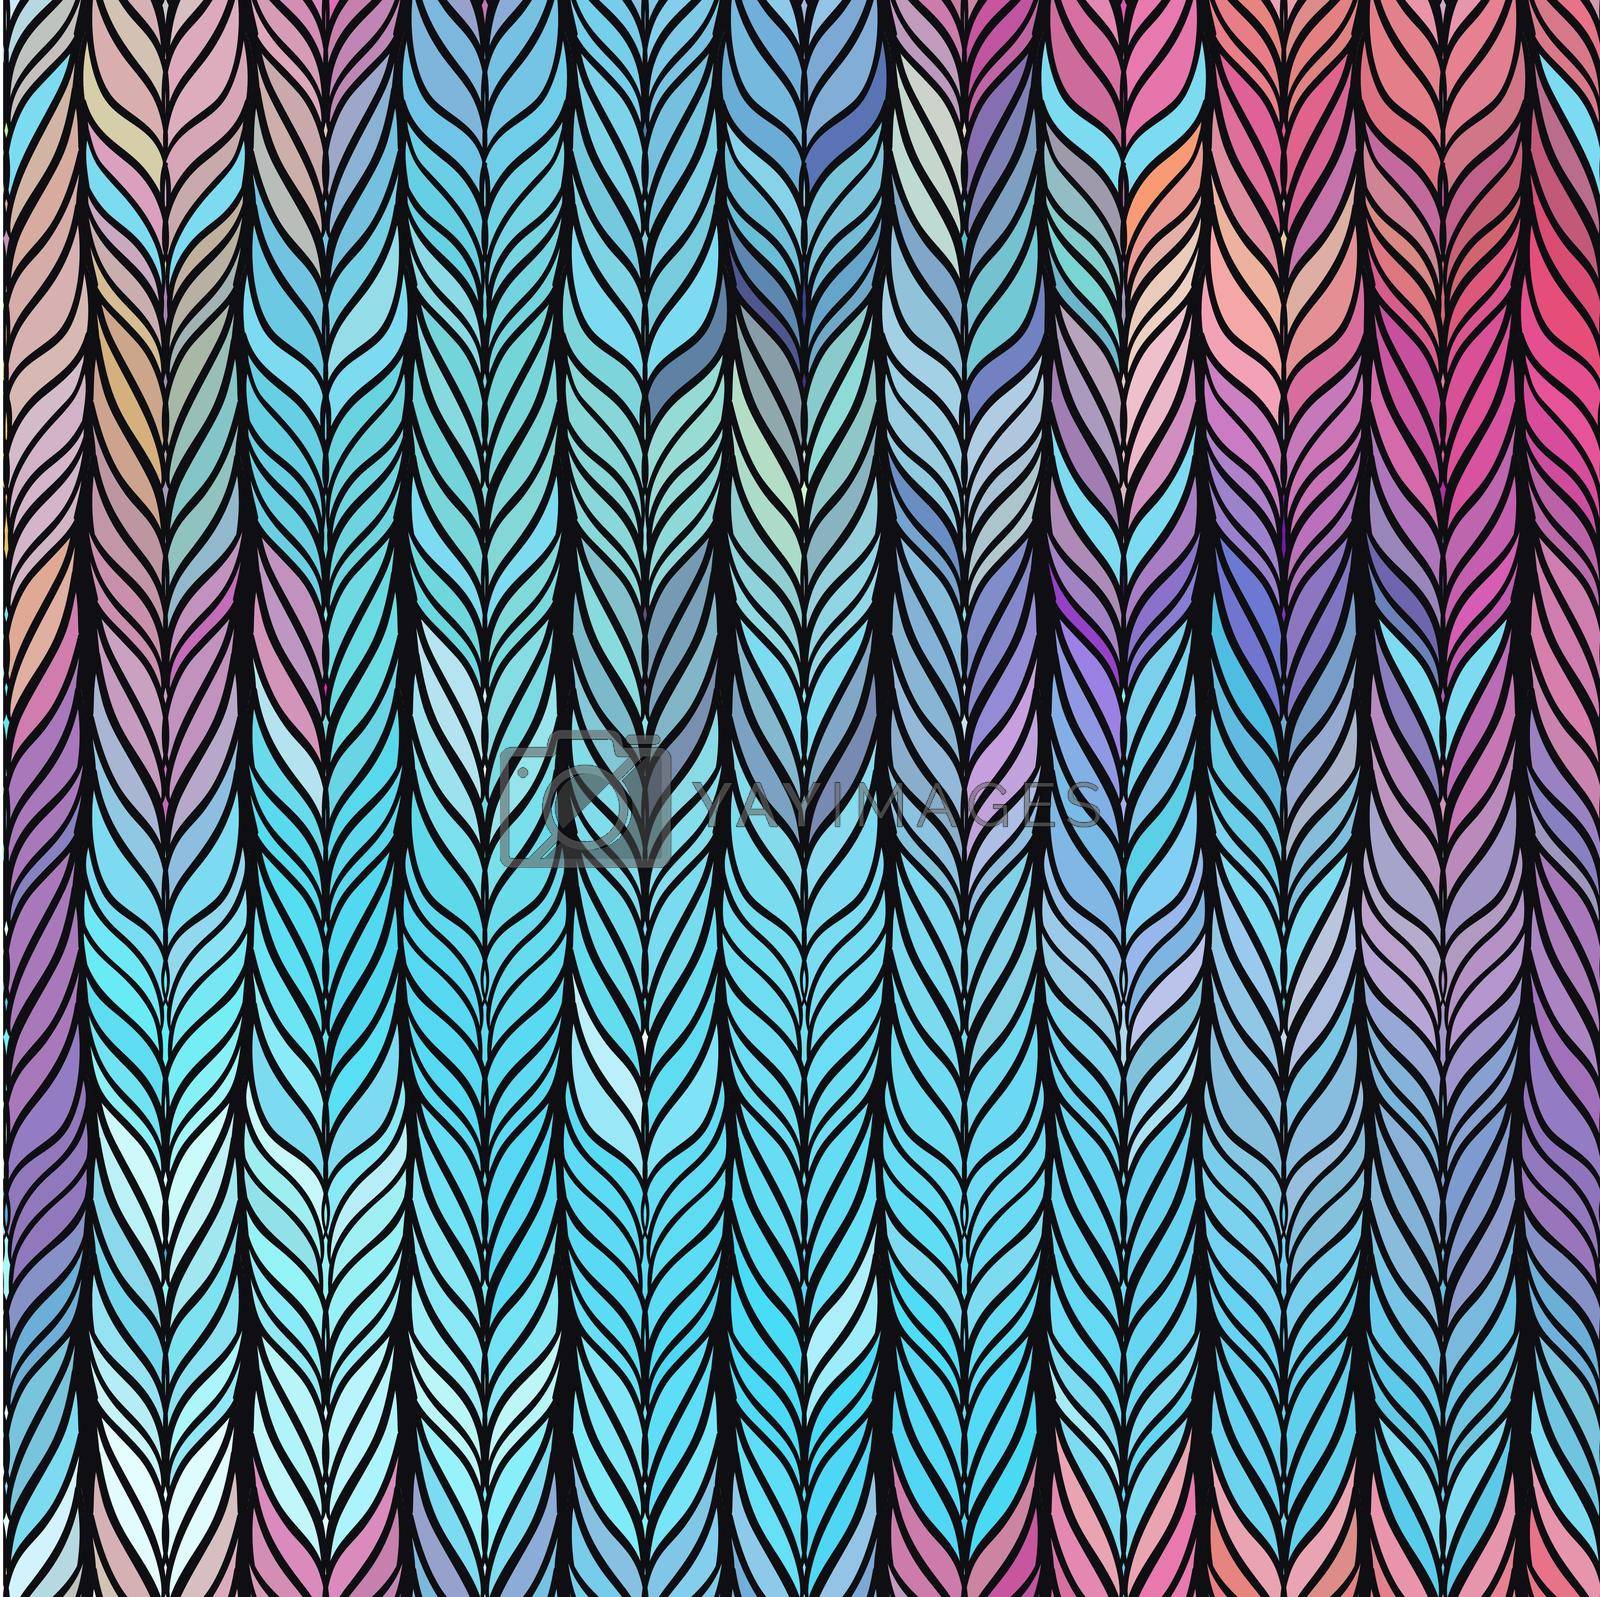 Optical illusion: Multicolor abstract seamless pattern. Texture of wavy vertical stripes. Stylish abstract background.